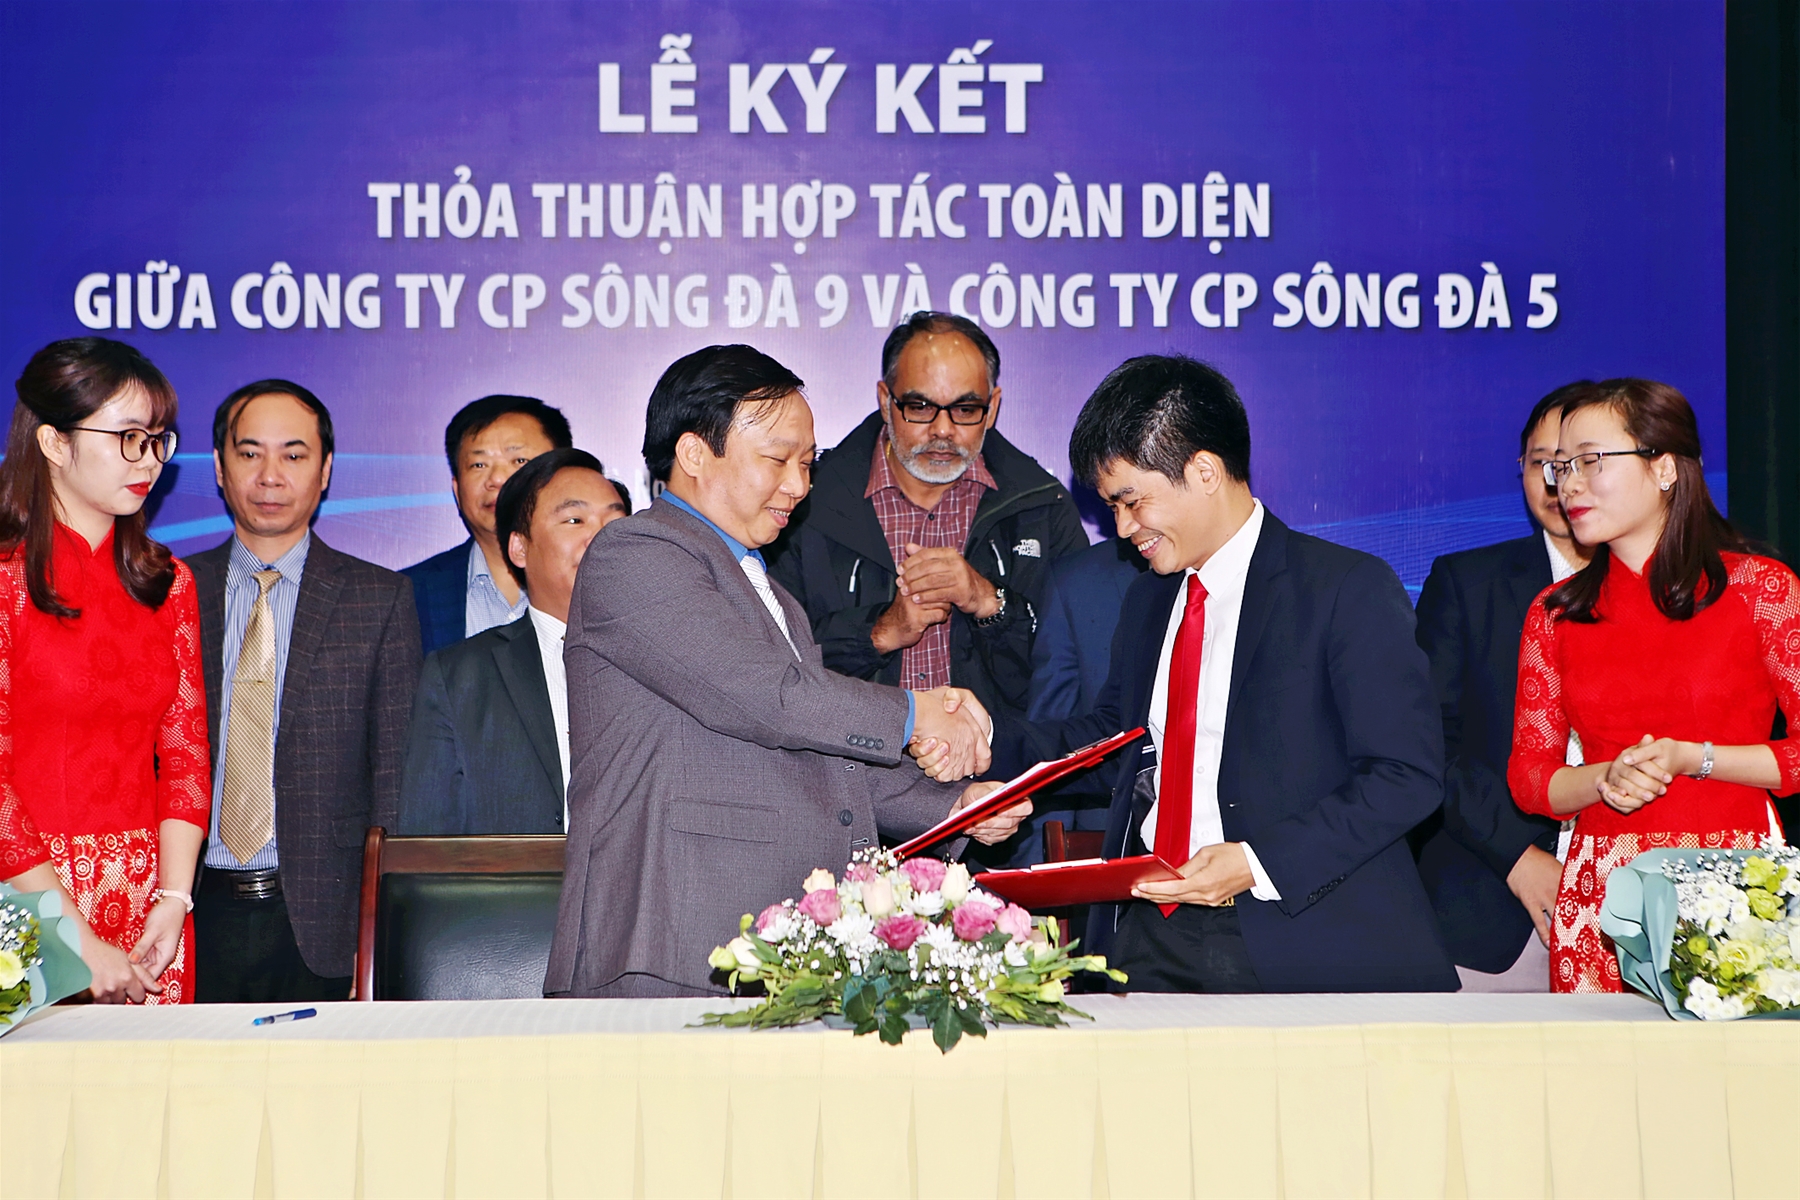 Joint Agreement signing ceremony between Song Da 9 and Song Da 5